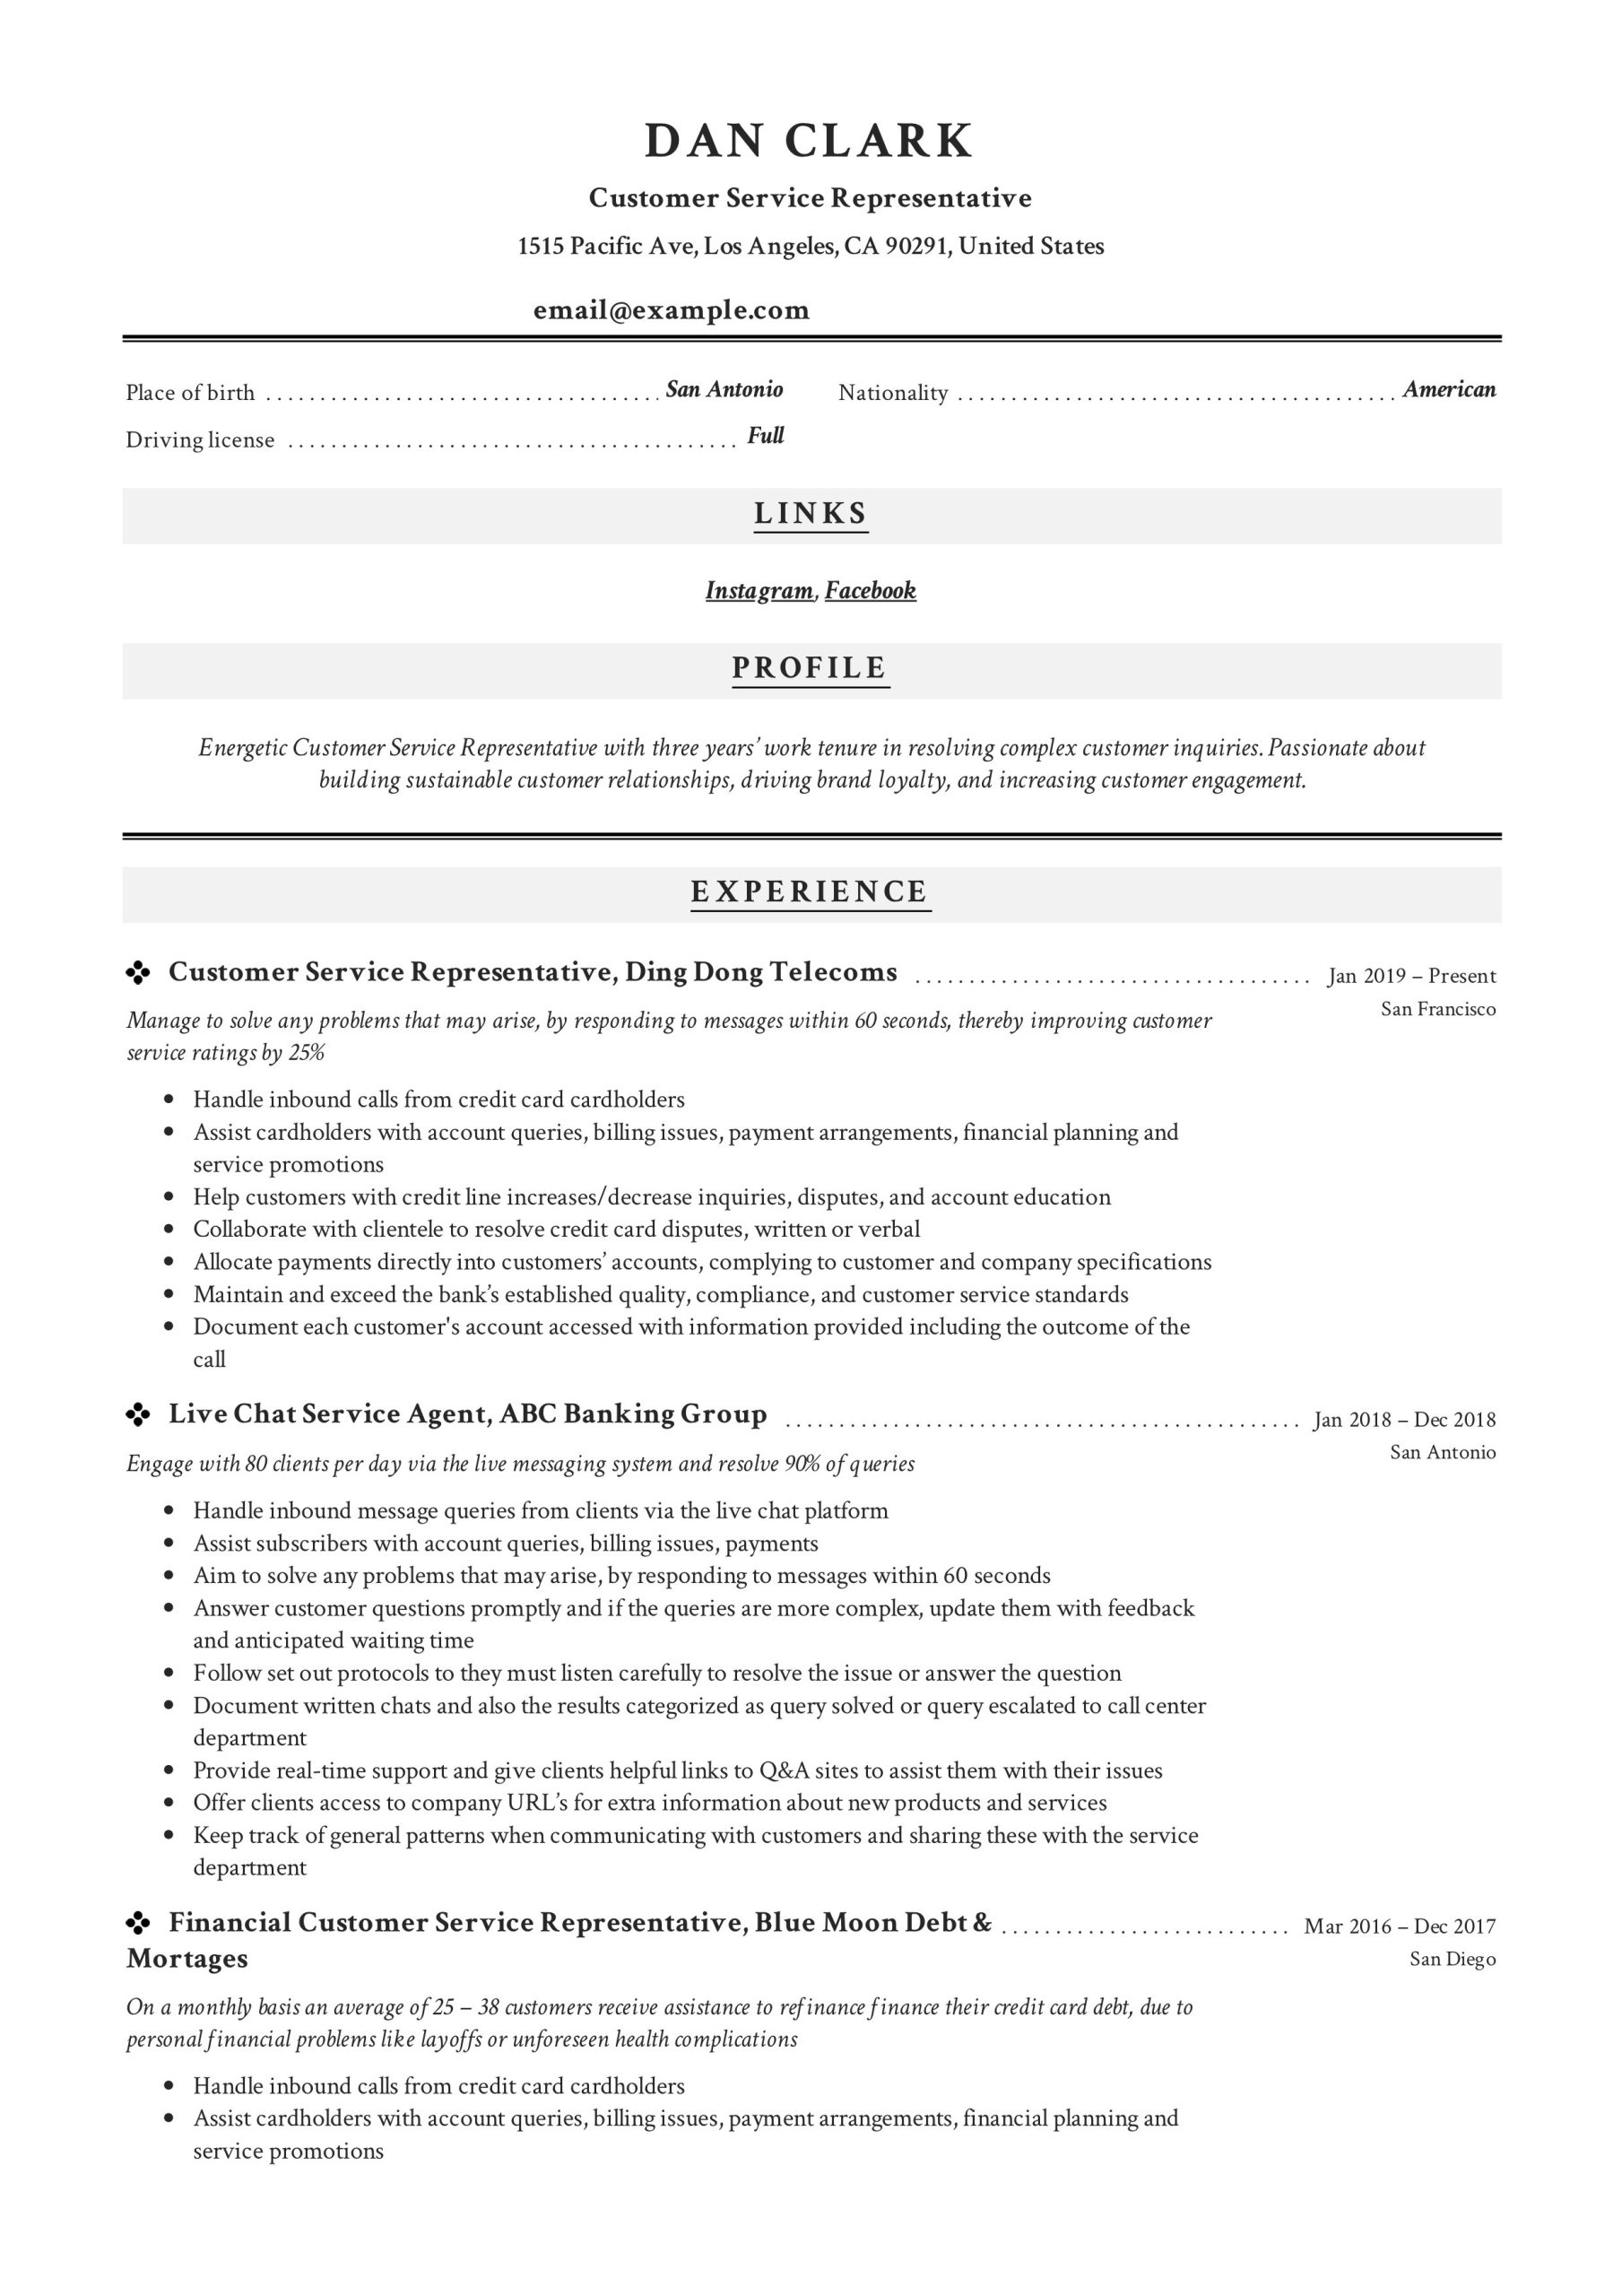 Resume Sample for Customer Service Specialist Customer Service Representative Resume & Guide 12 Pdf 2022